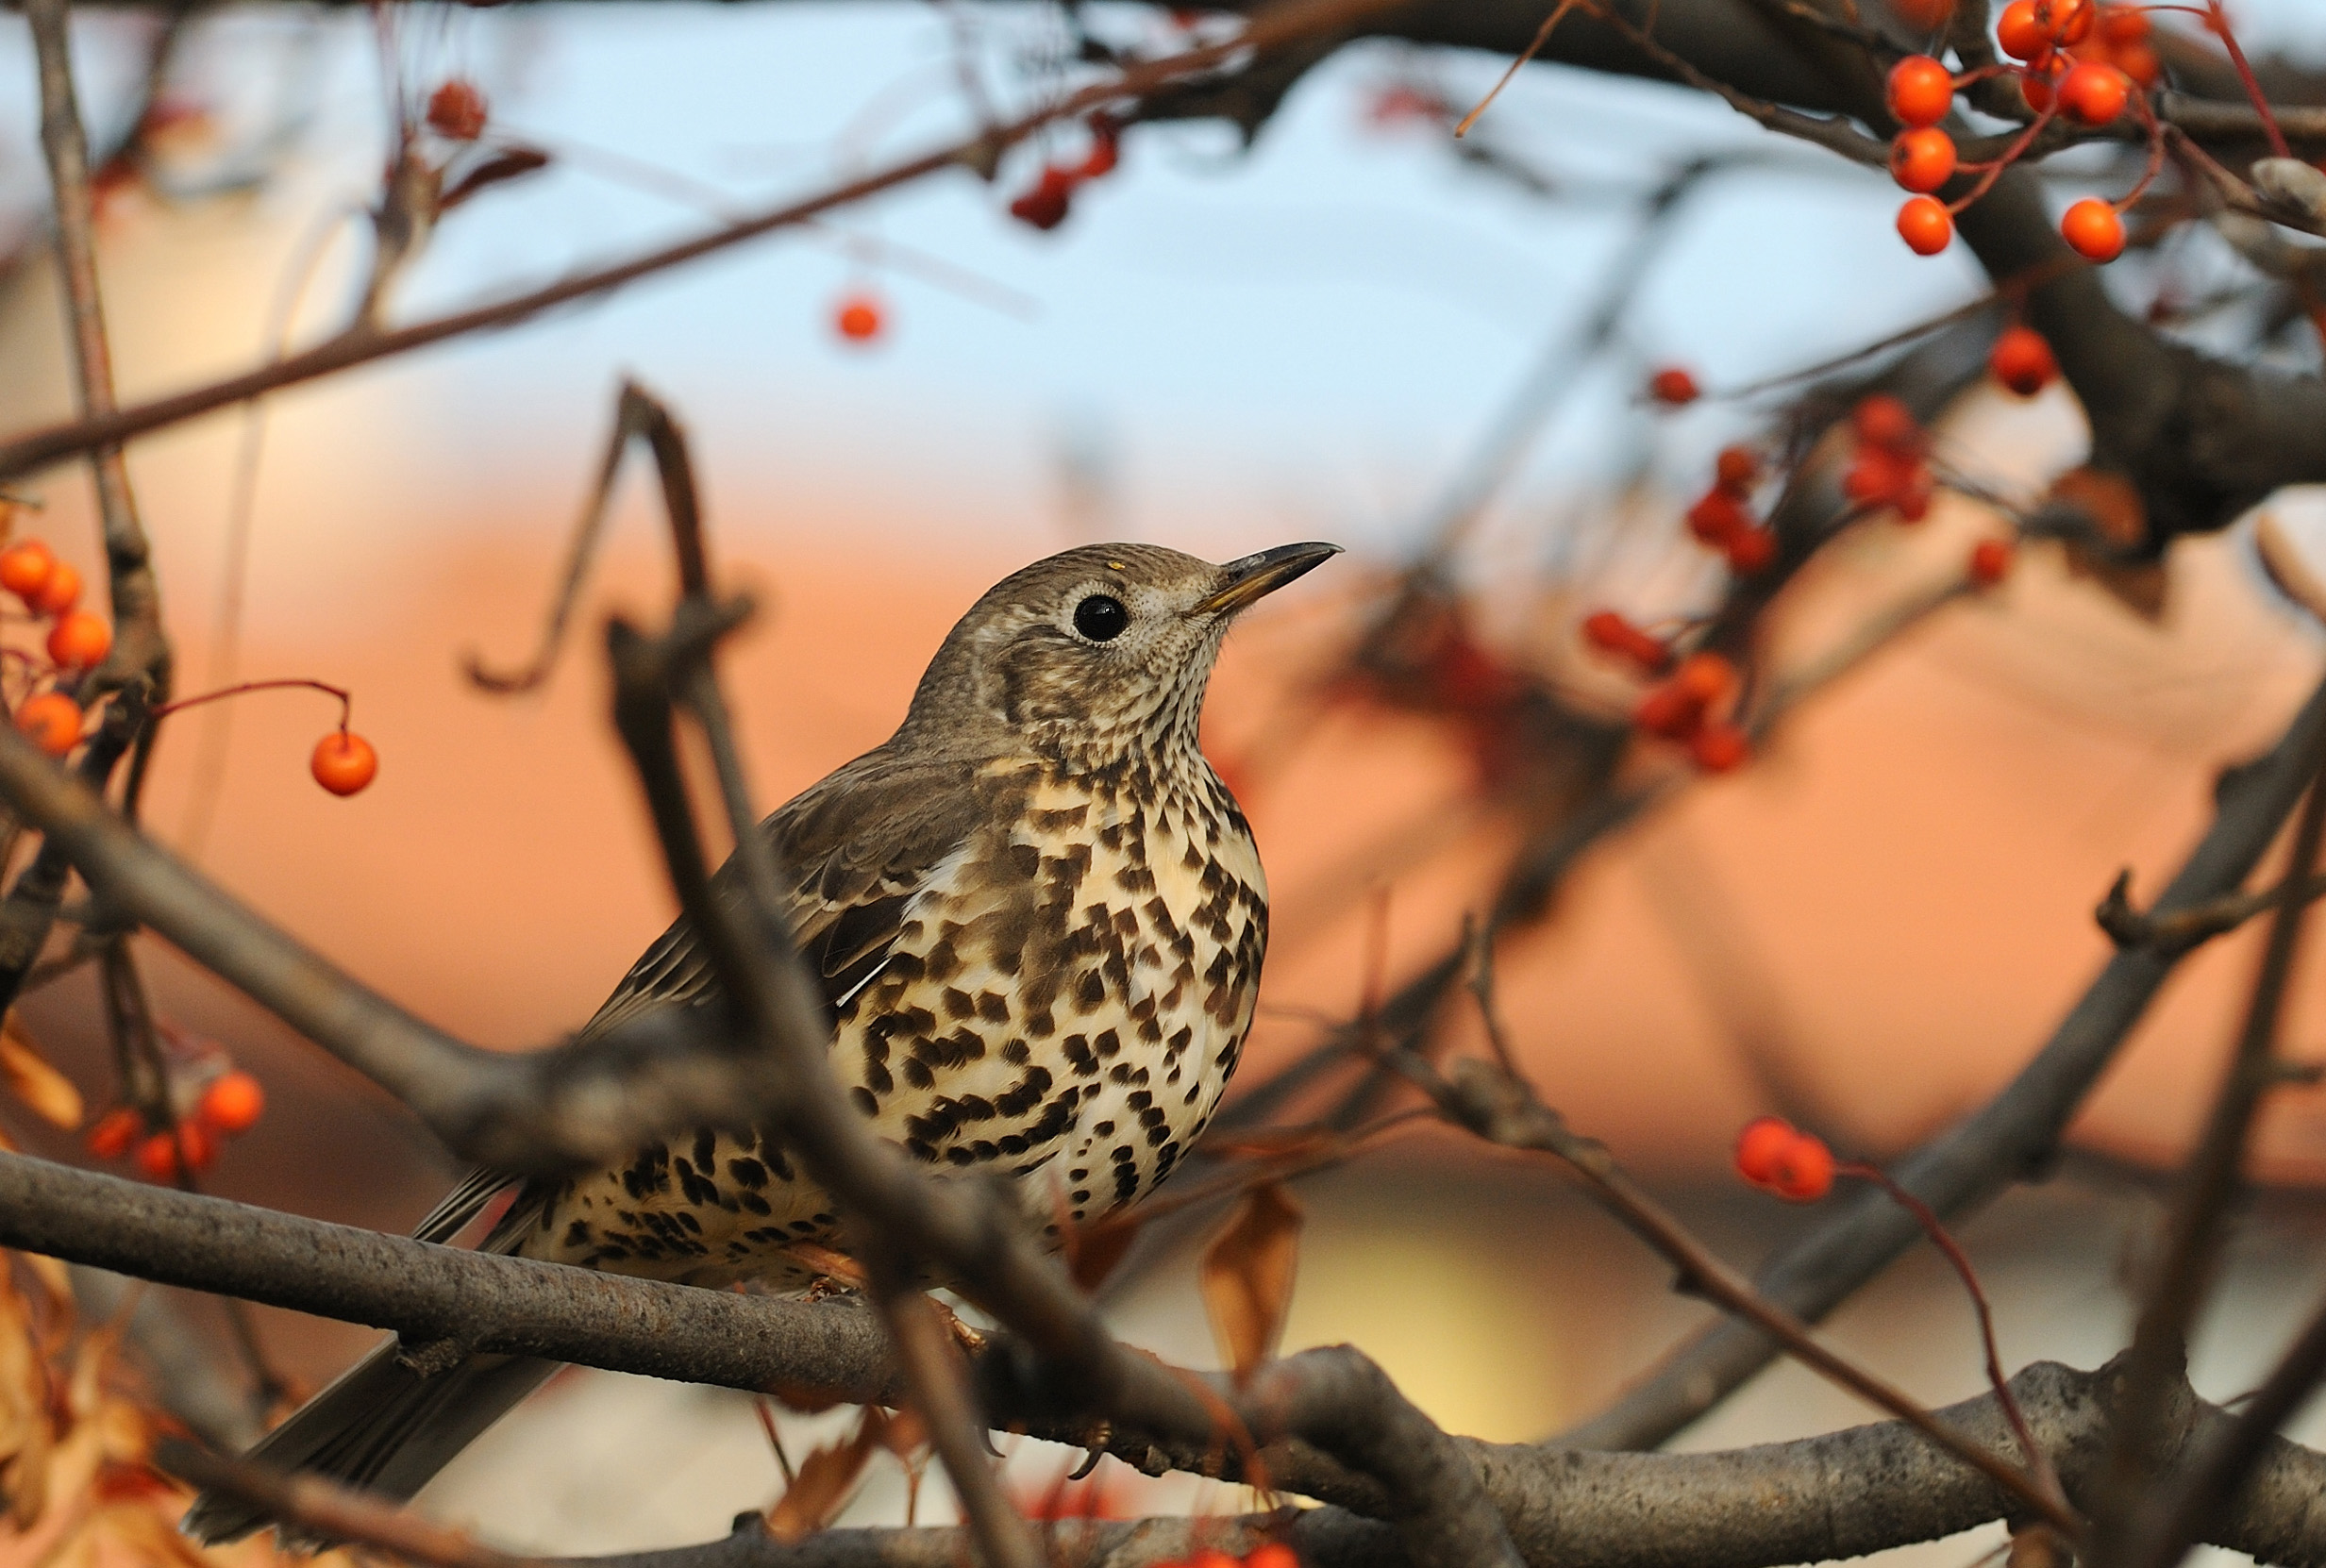 A side view of a Mistle Thrush perched in a tree surrounded by orange berries.